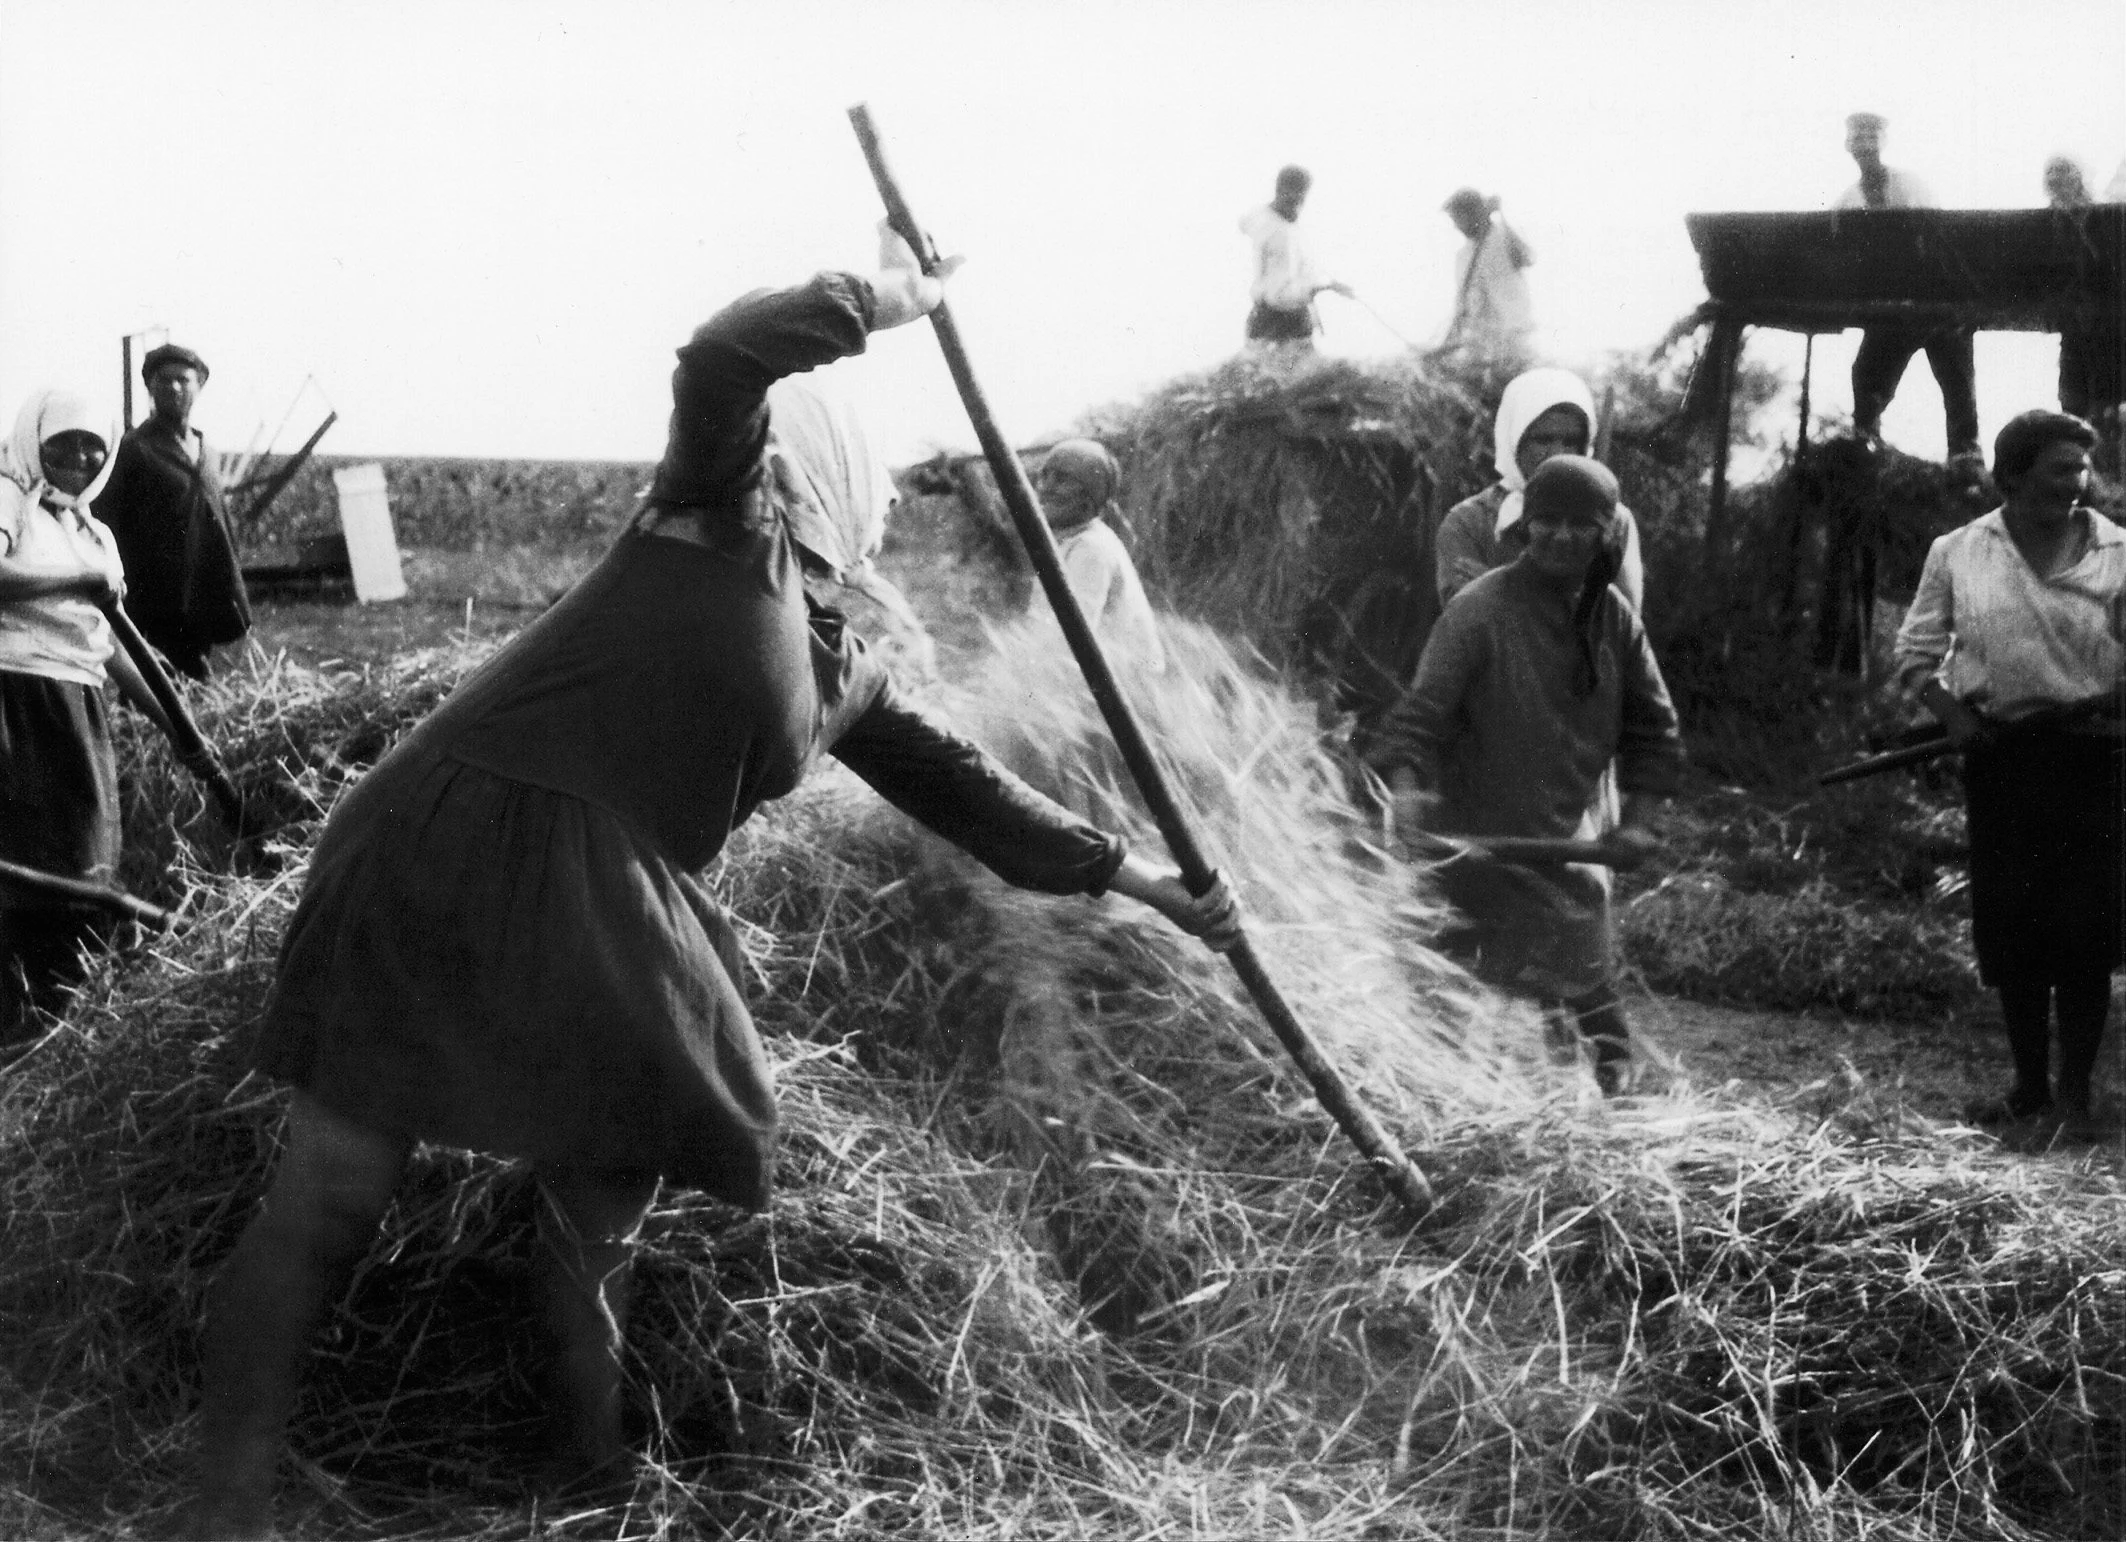 Threshing in the fields of a Jewish agricultural colony USSR, c.1930 AJJDC Archives, New York